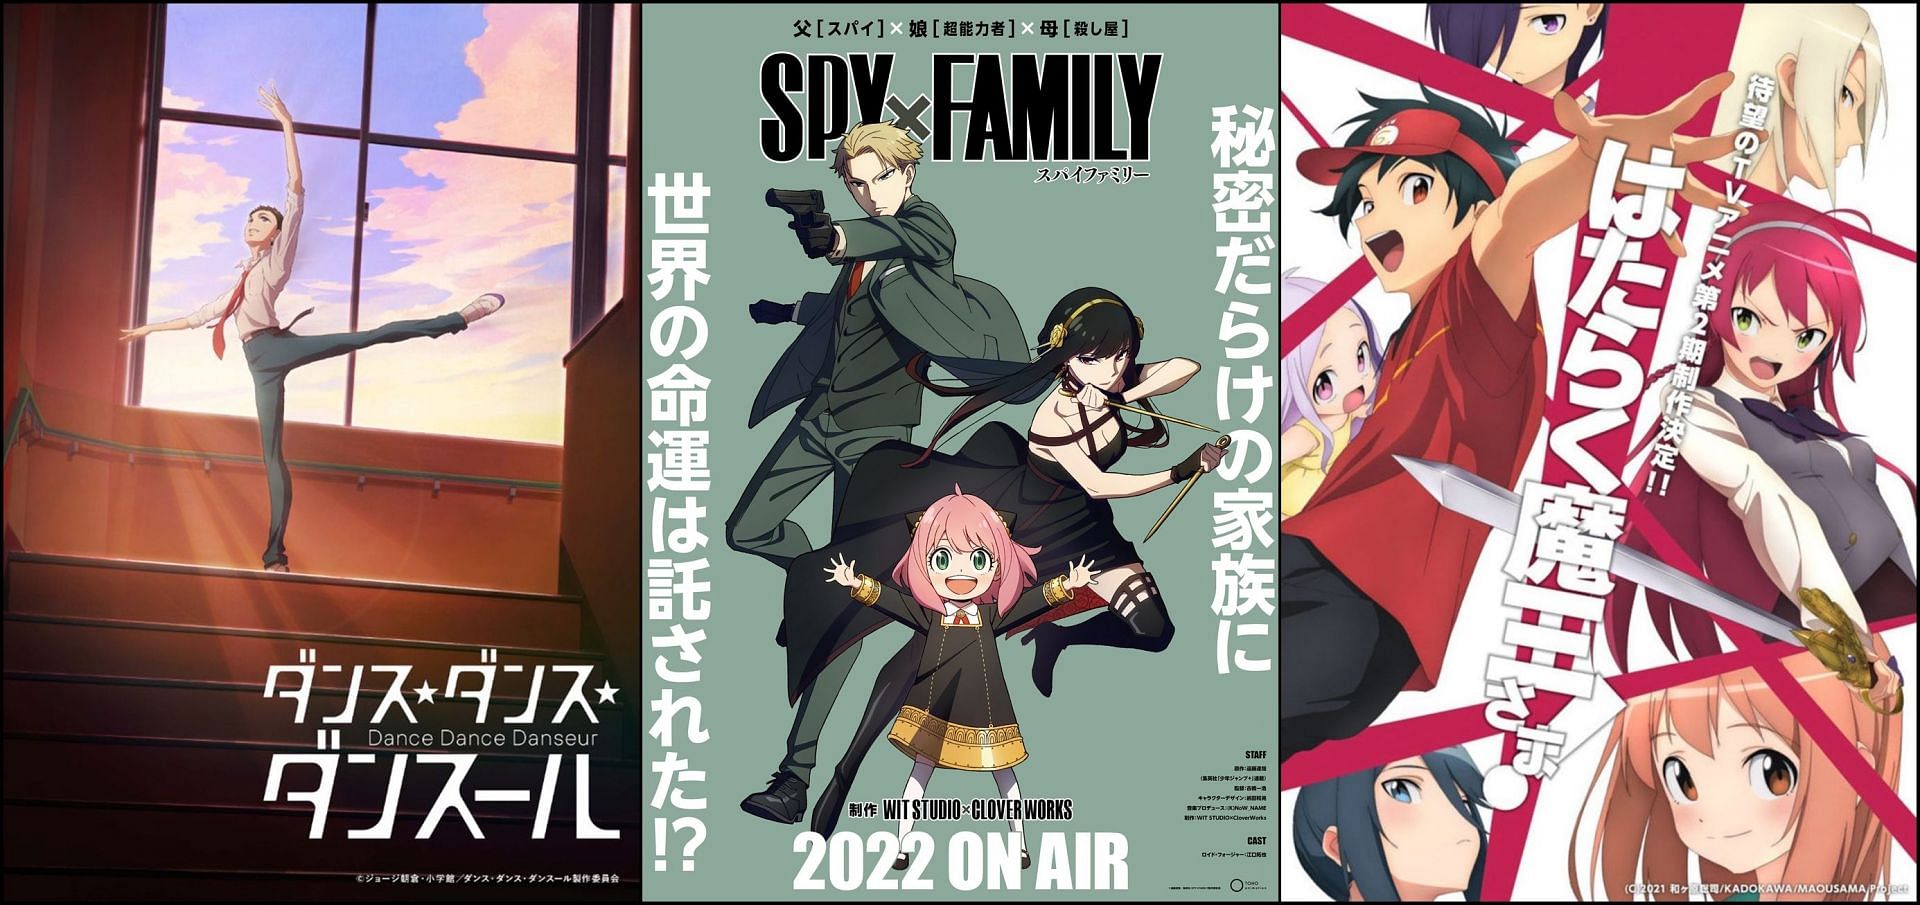 Most Anticipated Anime of Fall 2022 According To Japan